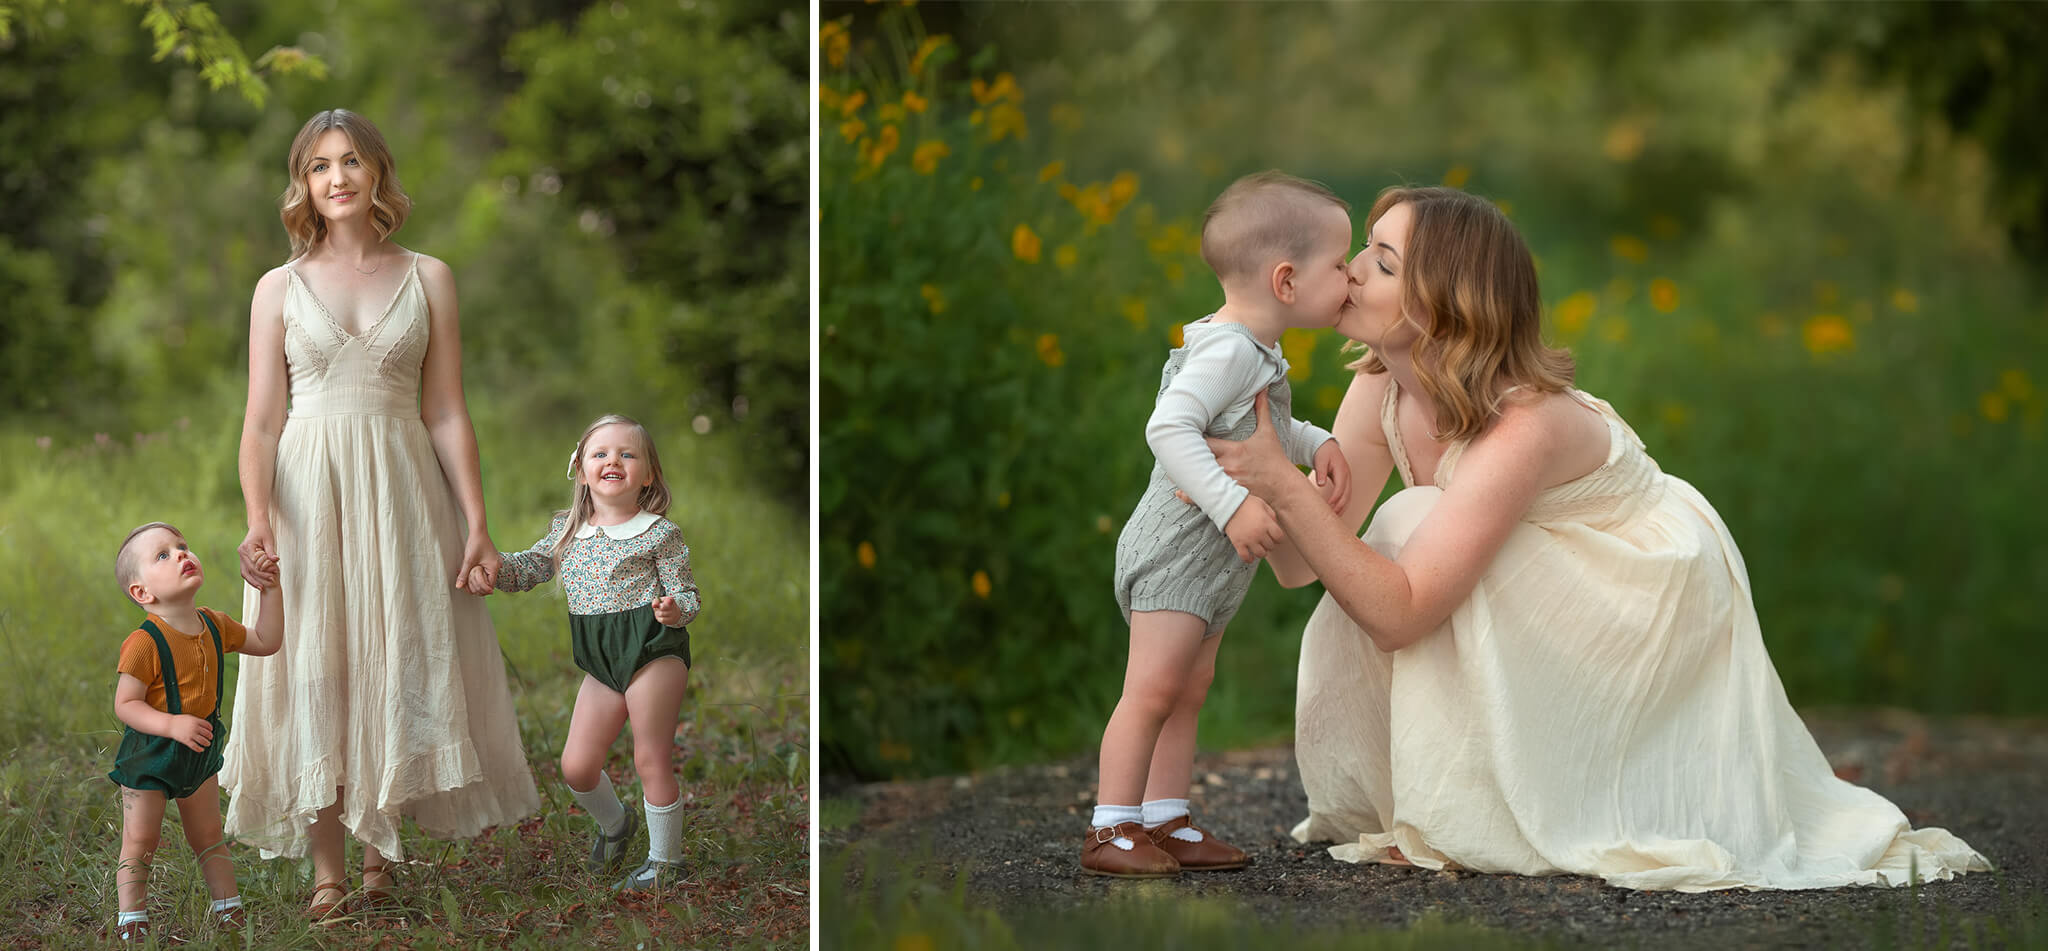 Perth mum with her toddlers in a lush green outdoor location during spring family photoshoot